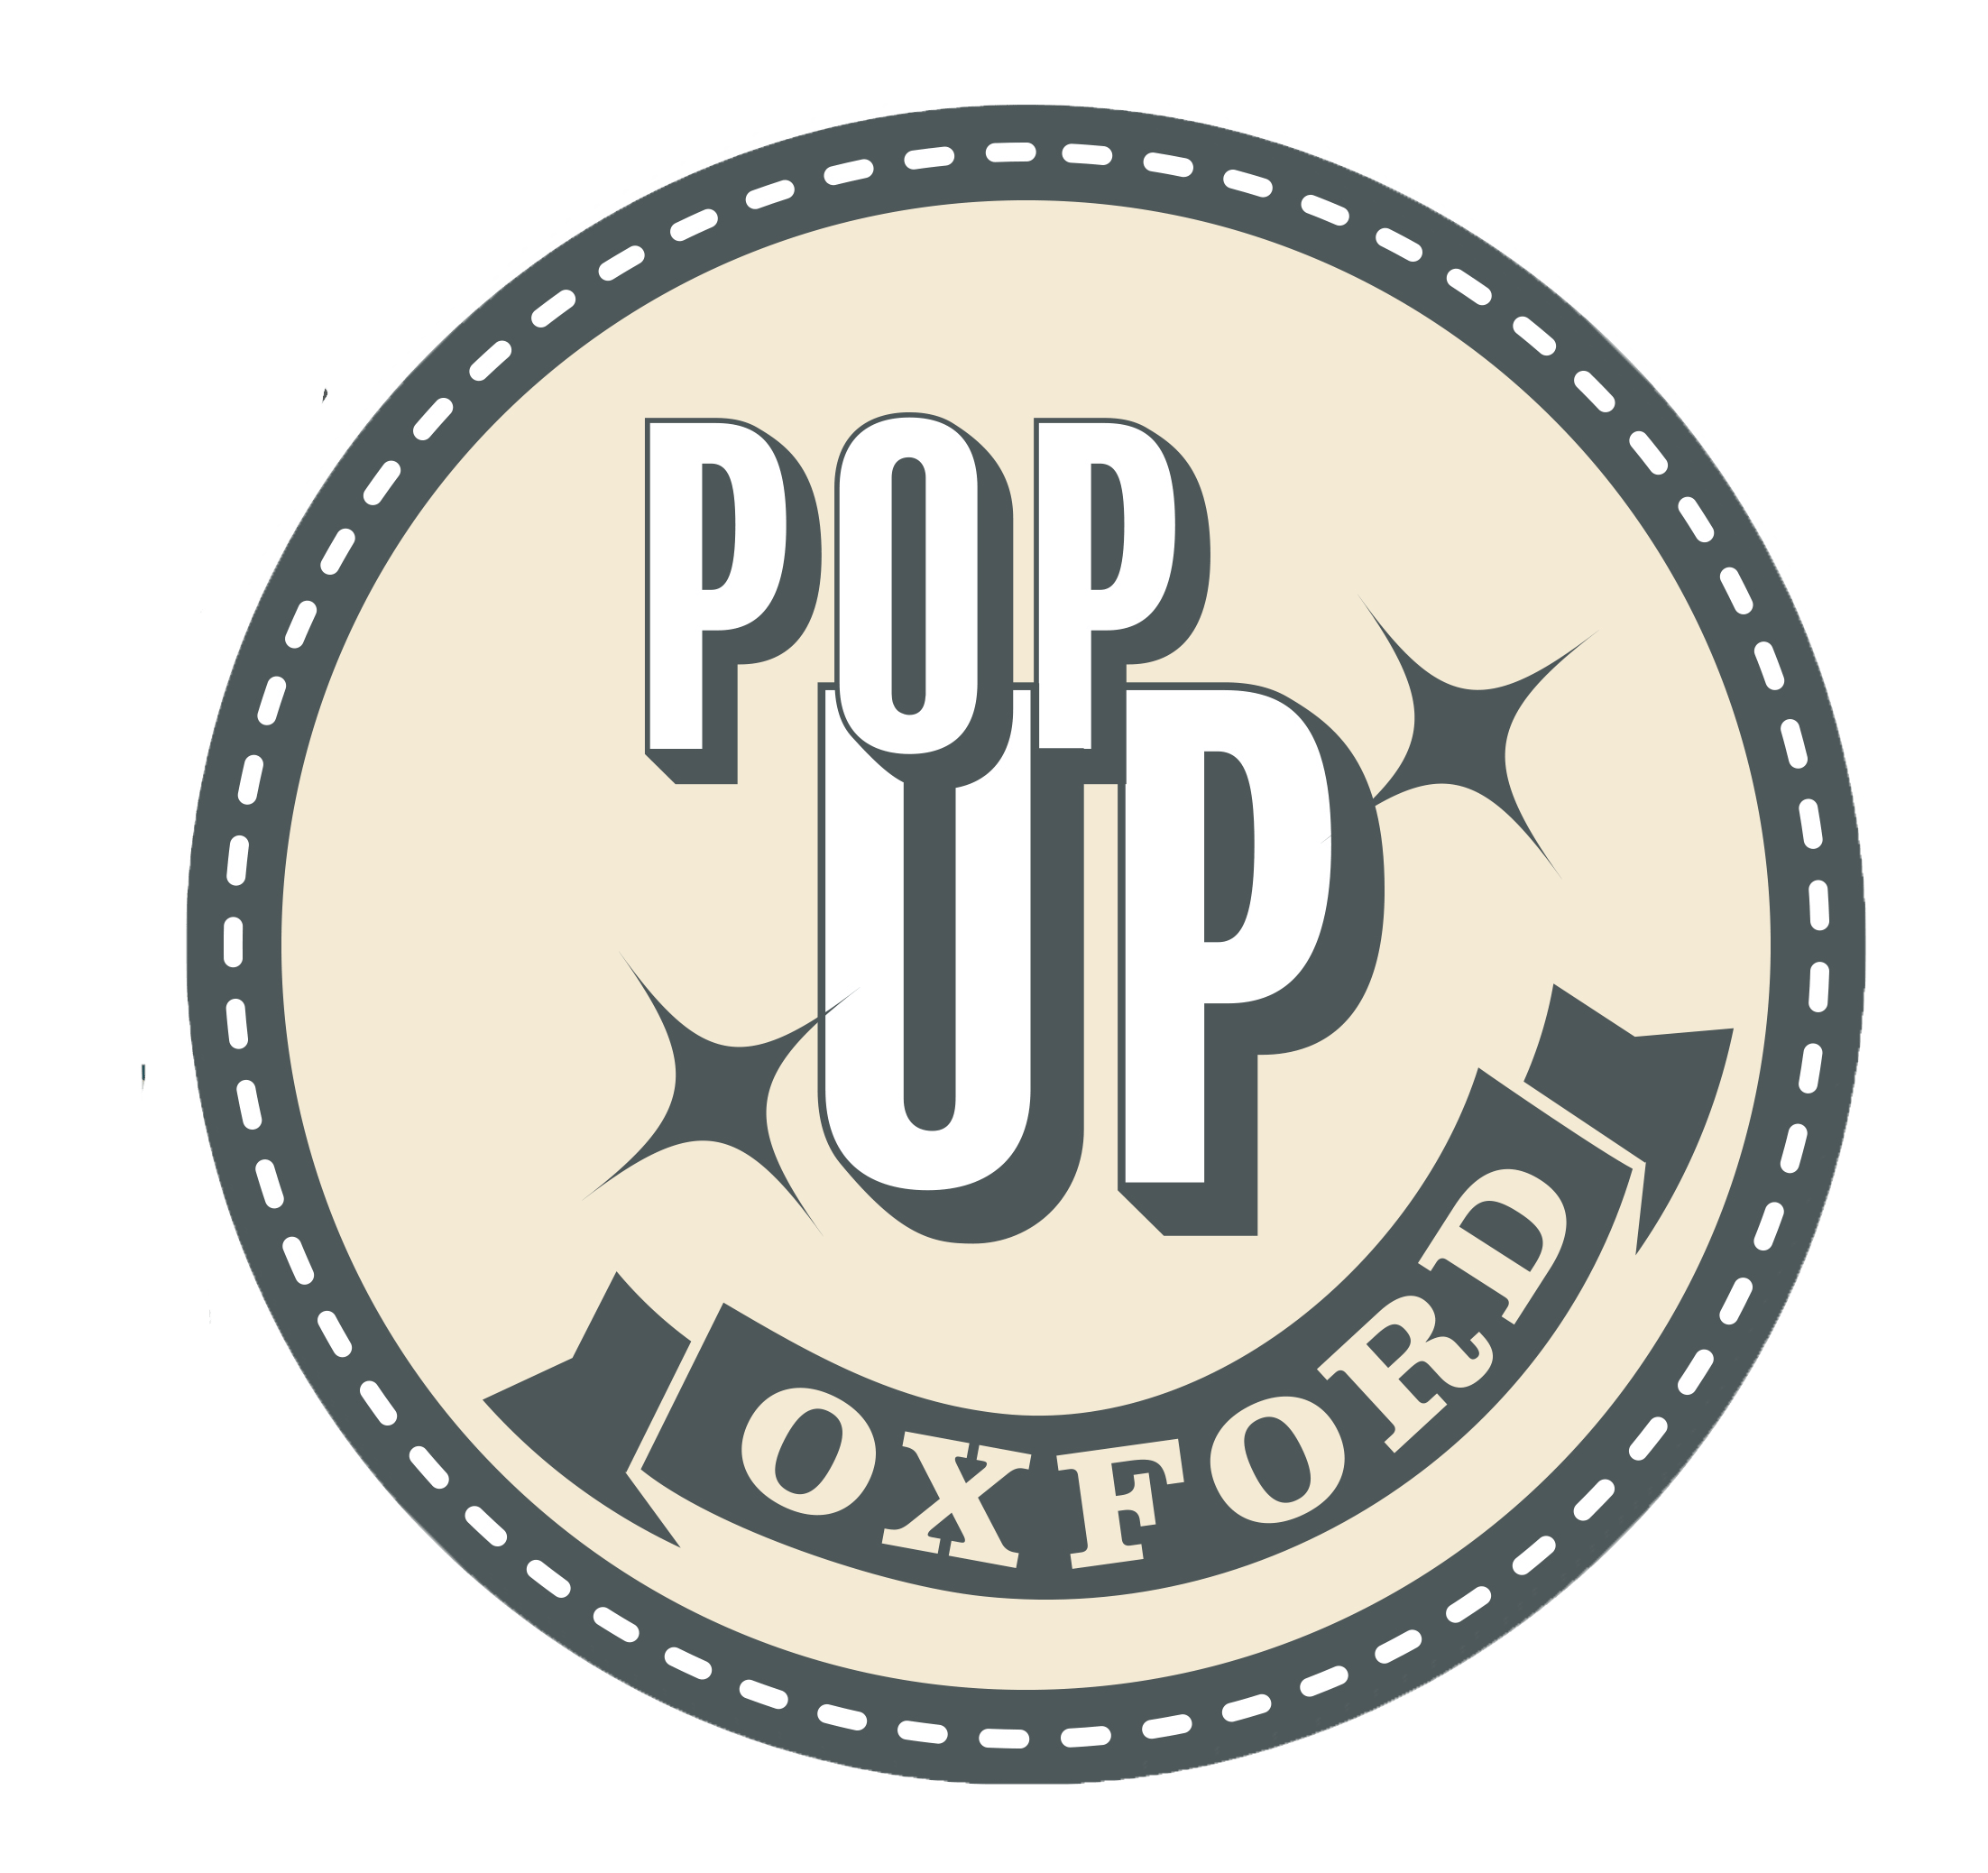 Pop Up Oxford will be one of the highlights of the year